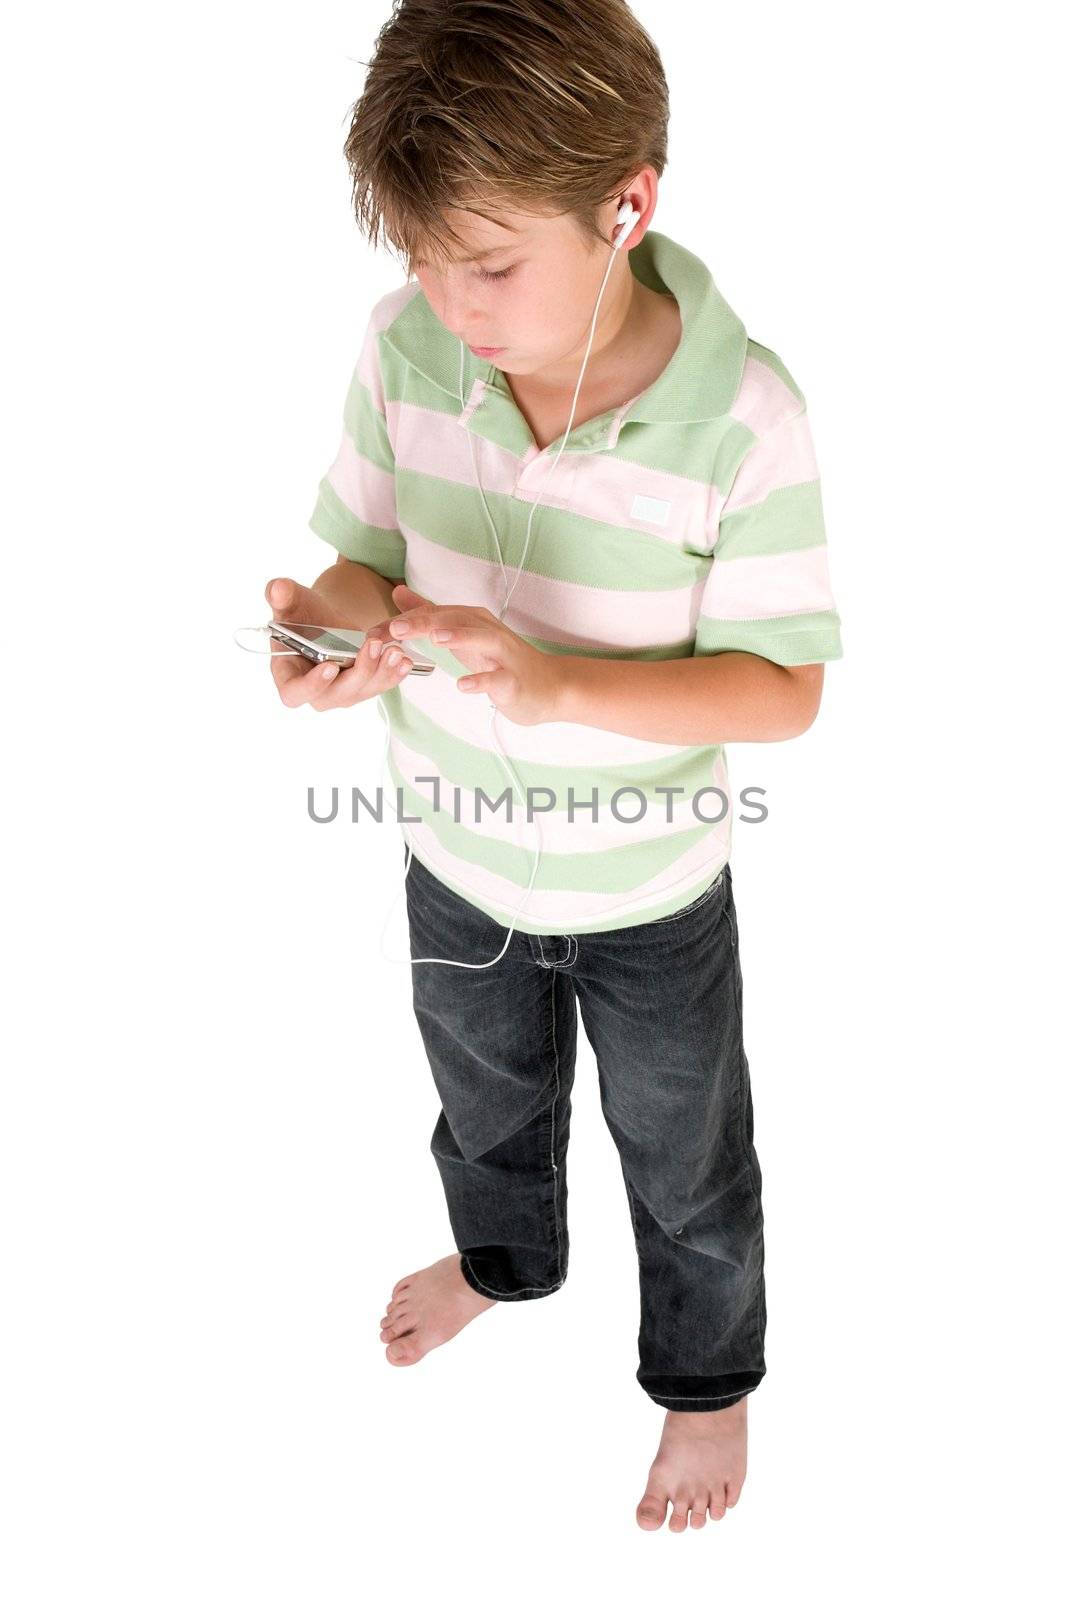 Standing young child using a music mp3 player